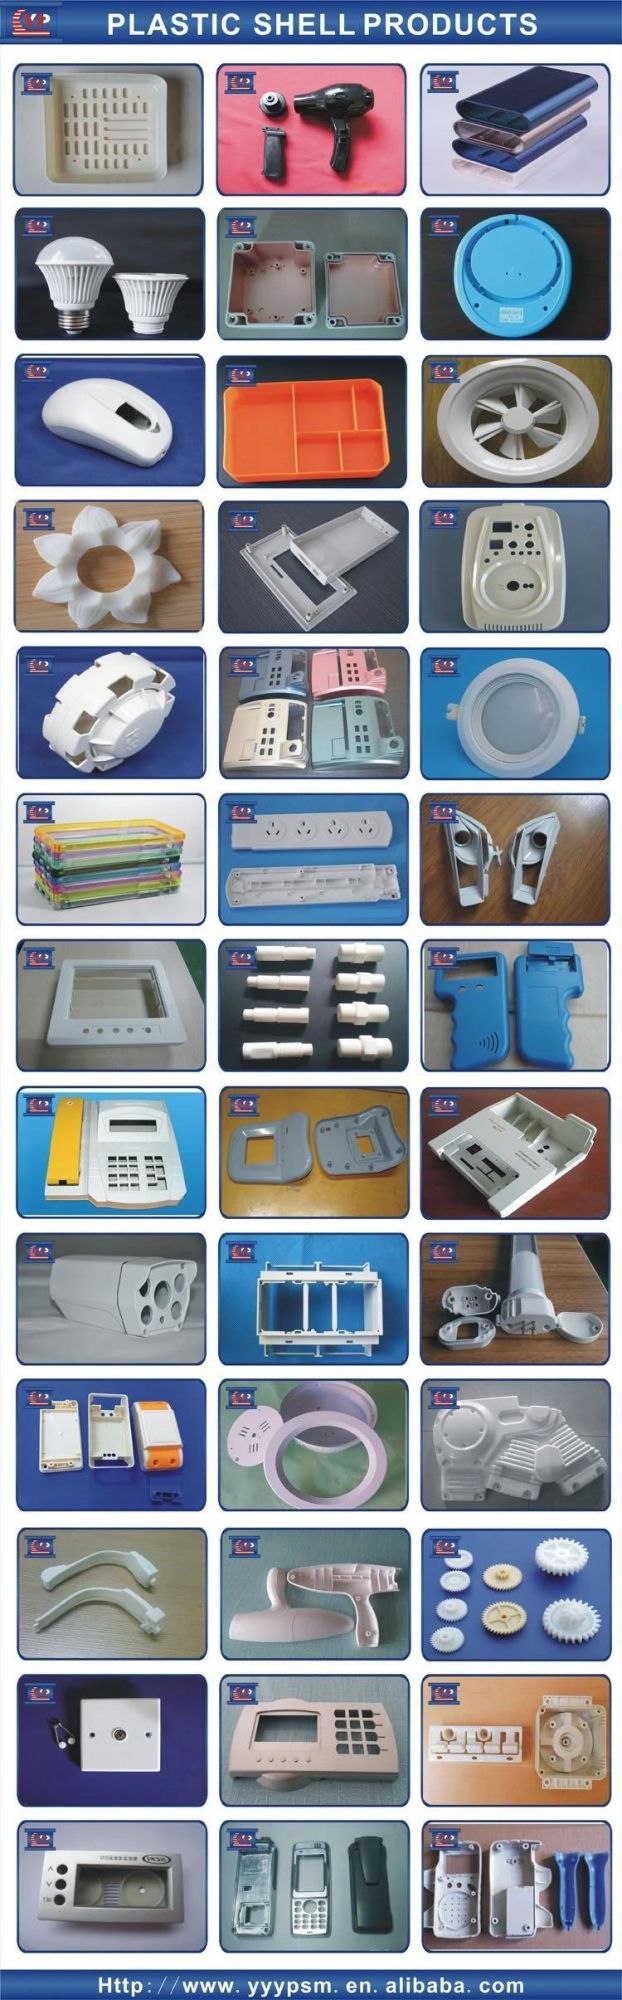 OEM/ODM Plastic Injection Mould Factory Price for Electric Grinder Cover